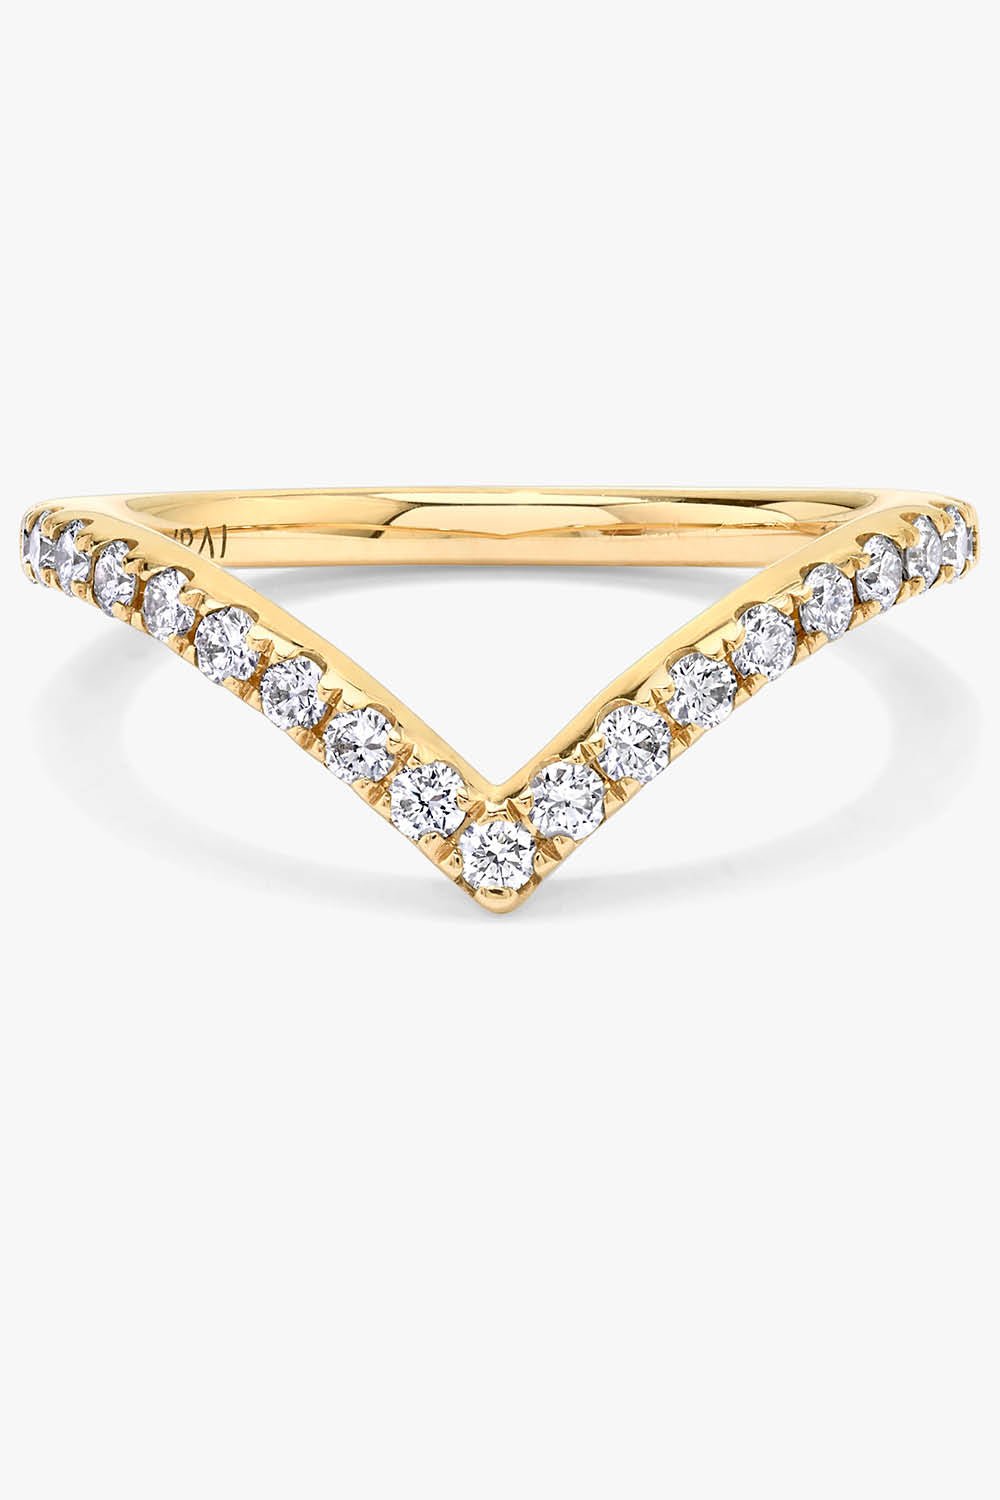 VRAI Signature V Band In Yellow Gold